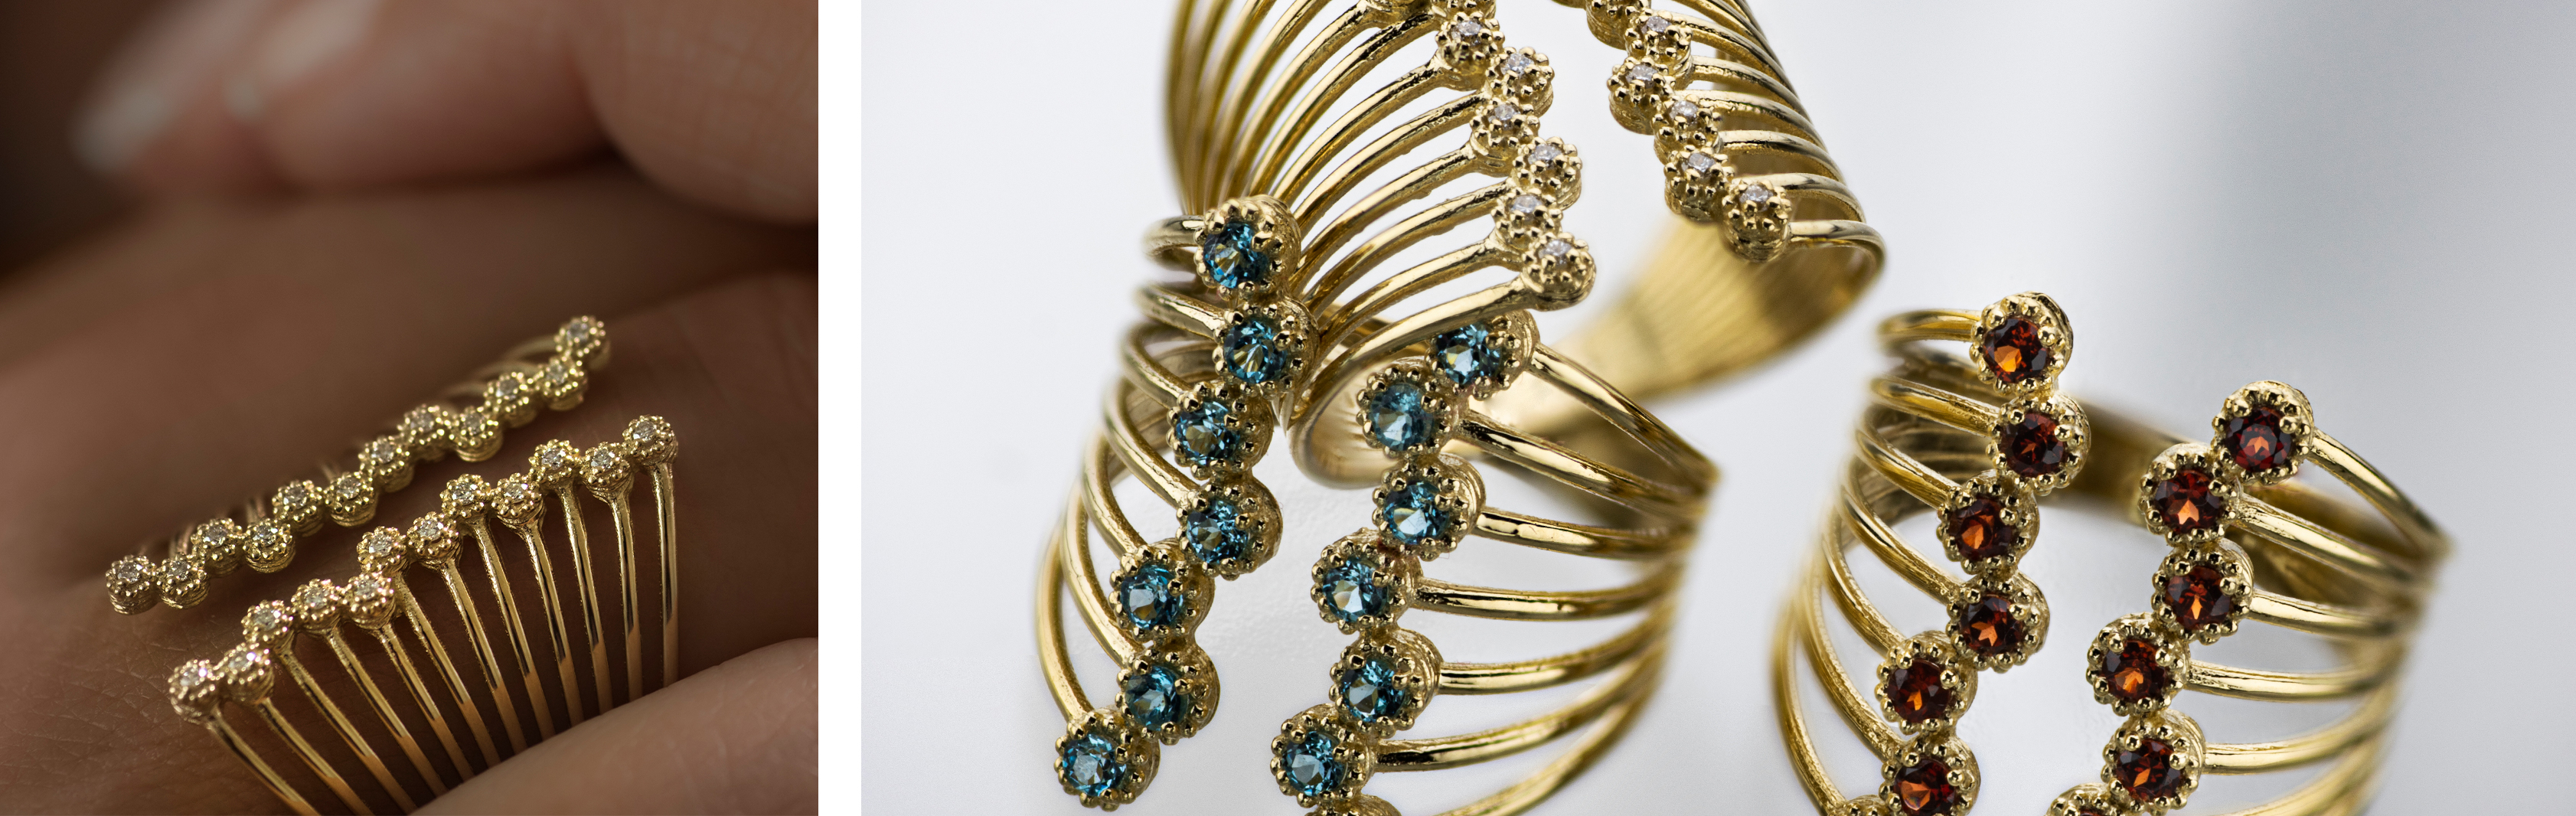 Fan Duo Collection | 14K Gold Jewelry with Blue Topaz Garnet and Diamonds